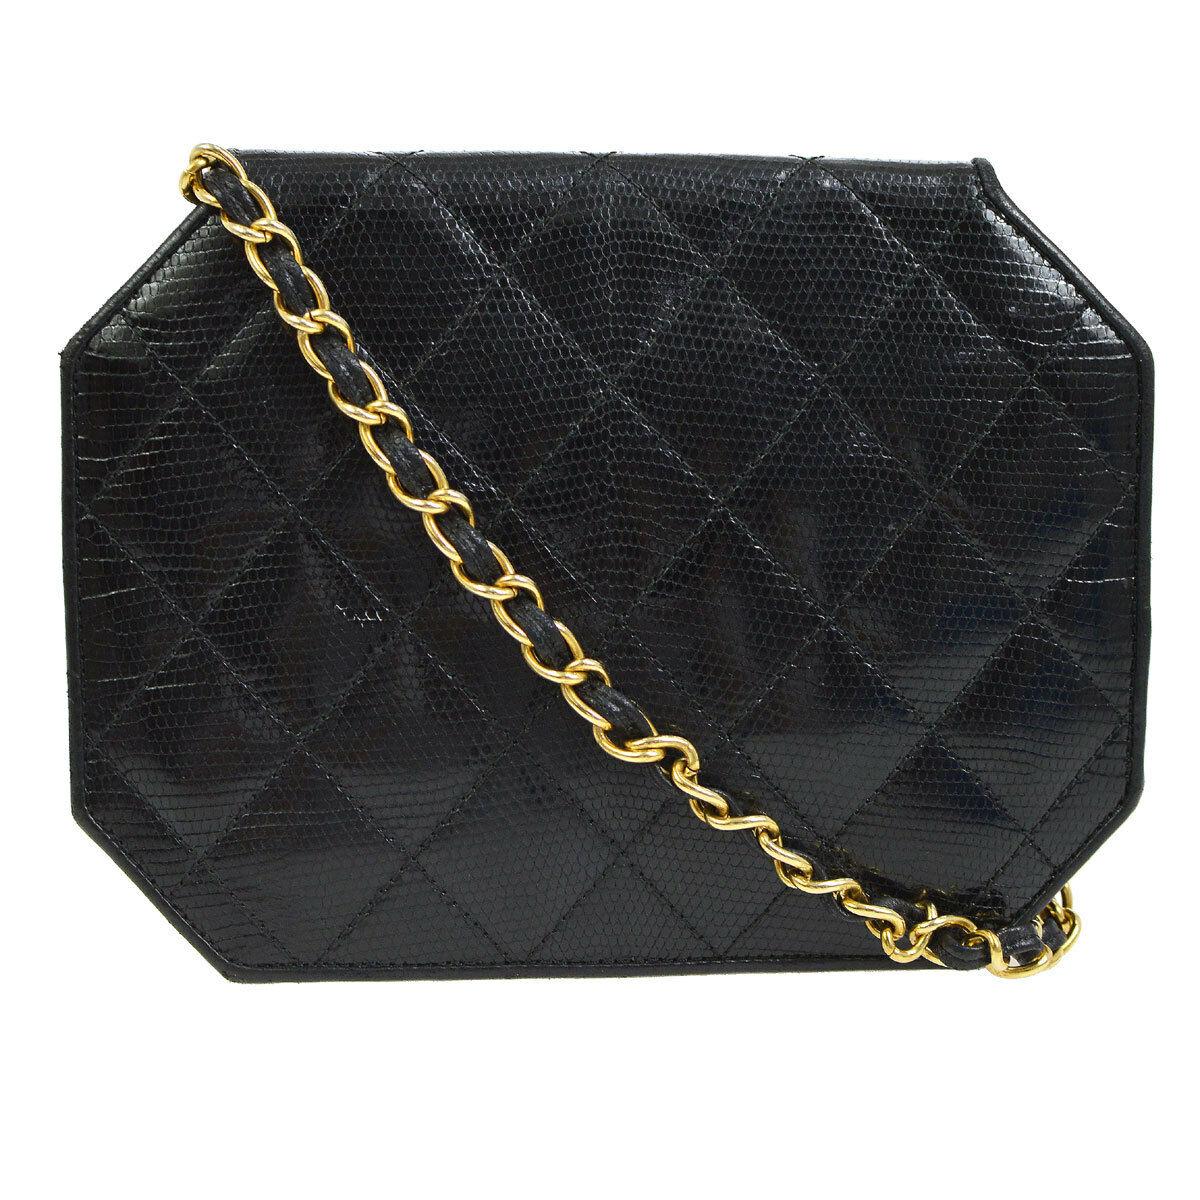 The Exotic Chanel to Complete Your Collection.

Since announcing the discontinuation of exotic skin handbags, the demand for exotic Chanel has increased tenfold.  And the demand for lizard skin Chanel is no exception.   Crafted of exotic lizard skin